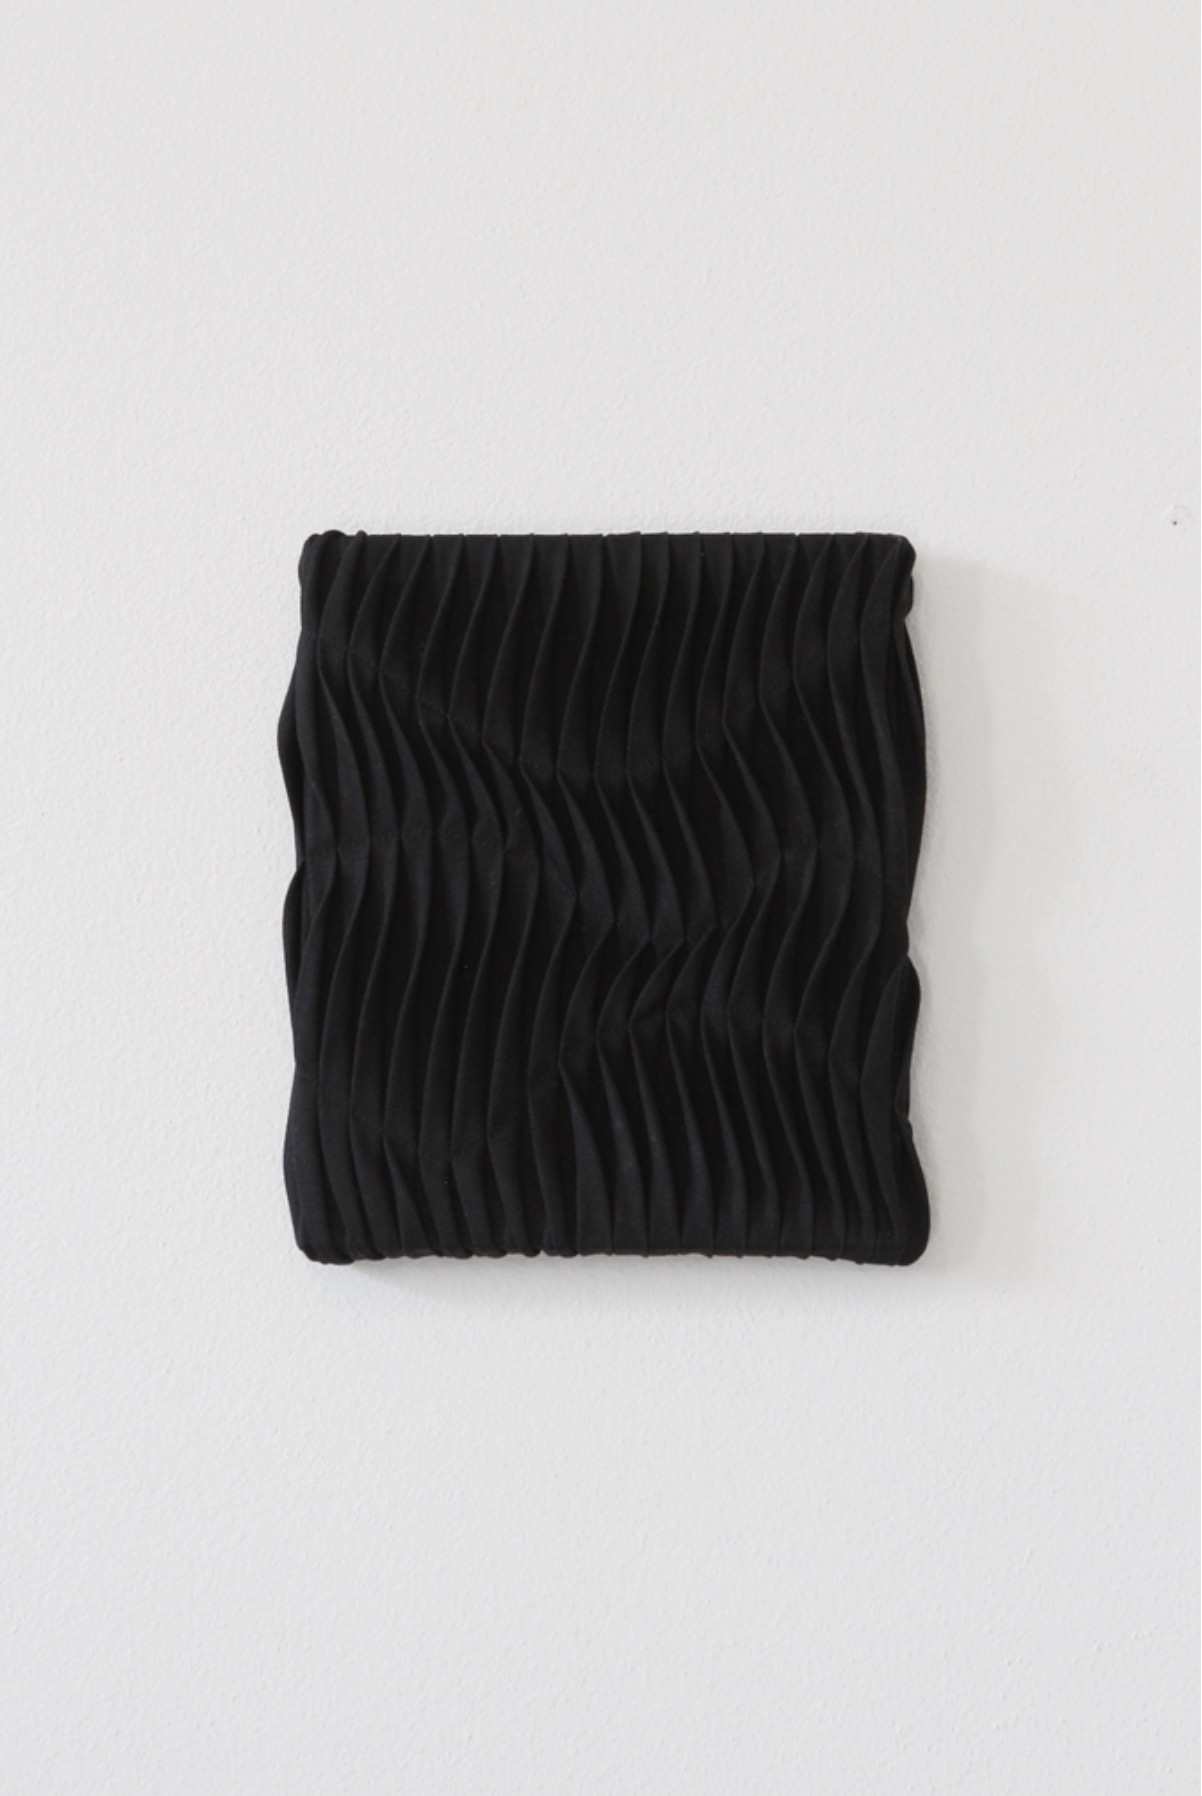 Painted Pleated Wall Sculpture